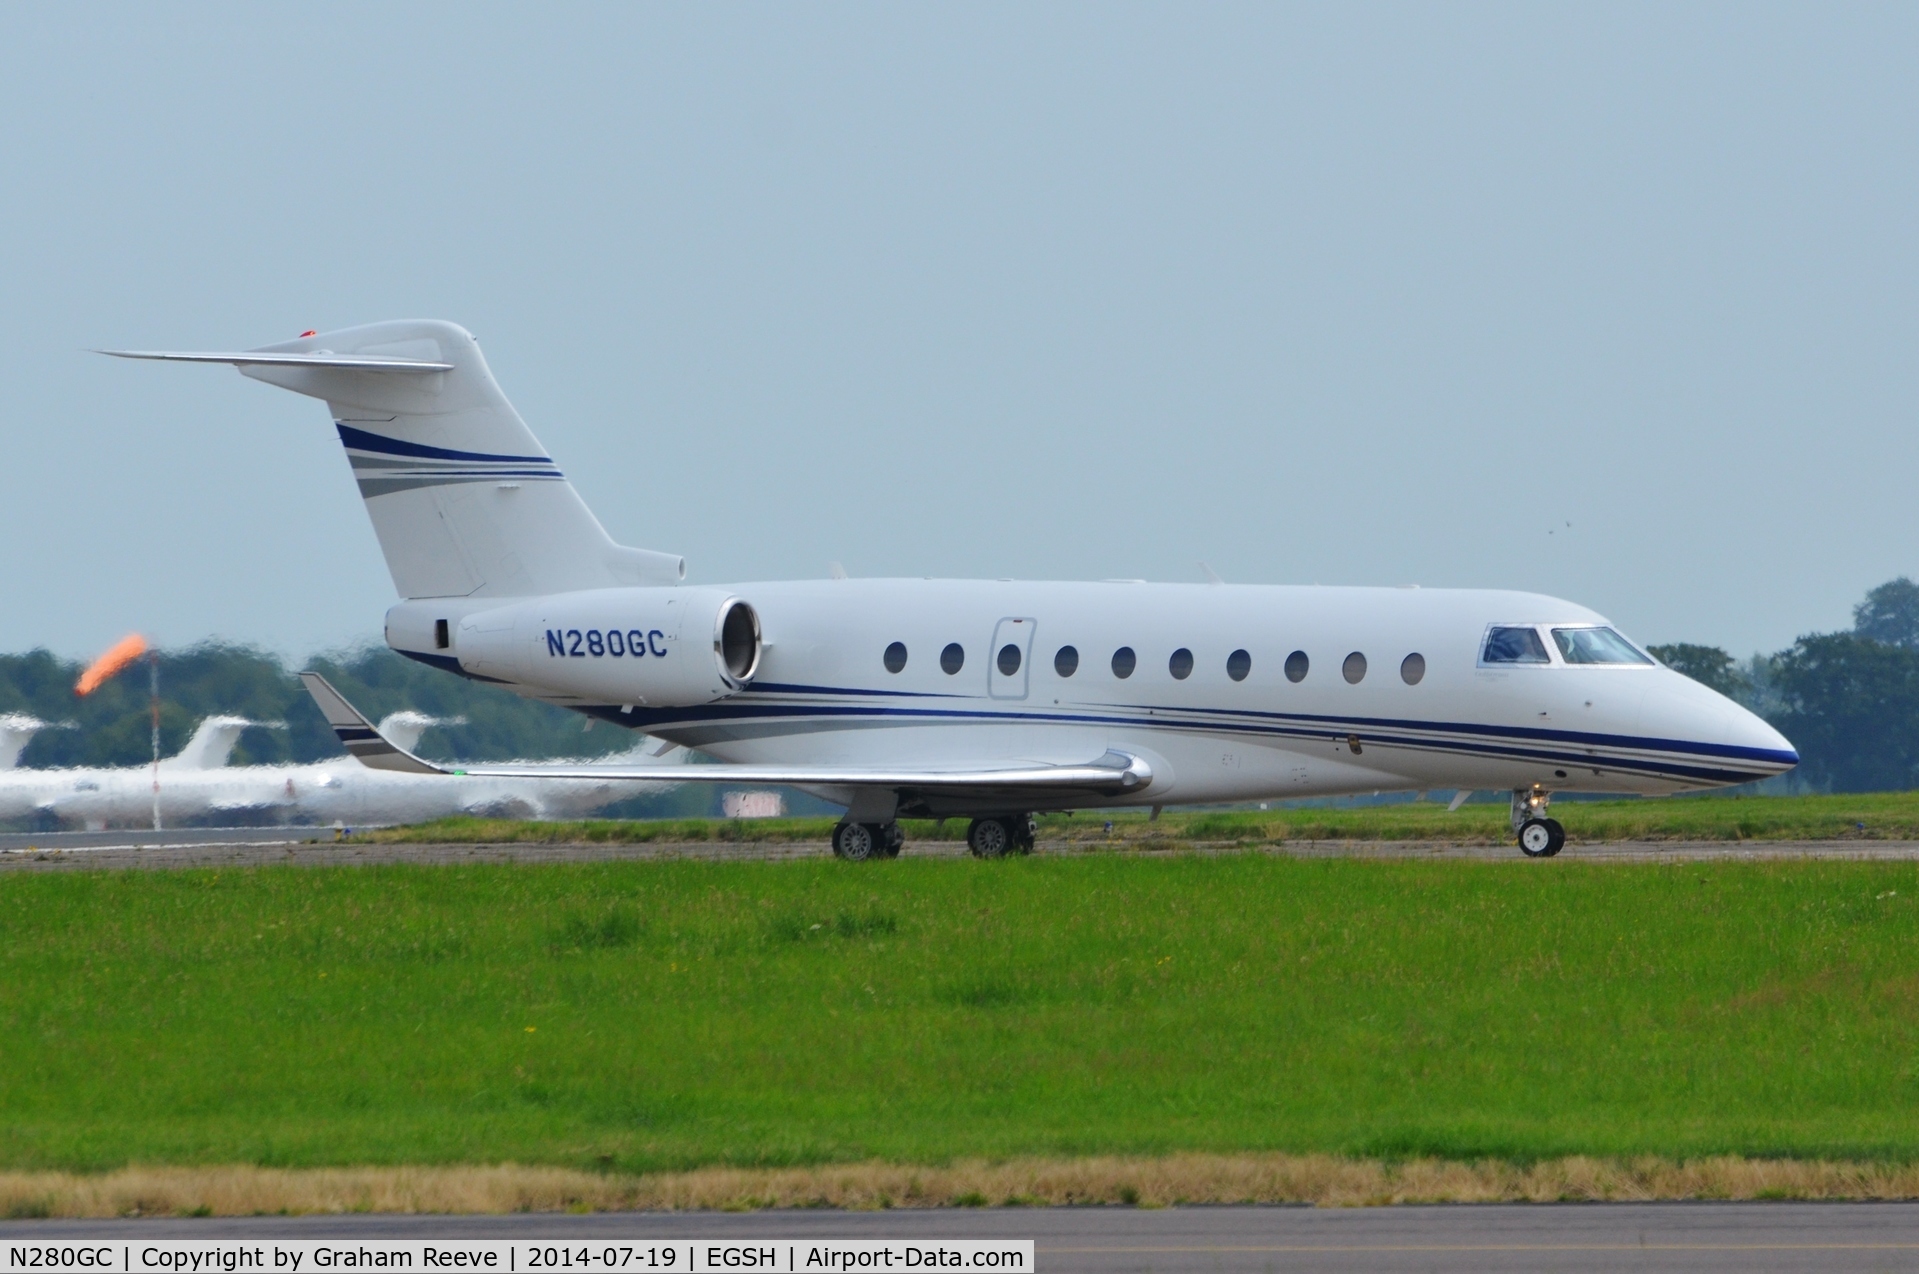 N280GC, 2012 Israel Aircraft Industries Gulfstream G280 C/N 2007, Just landed at Norwich.